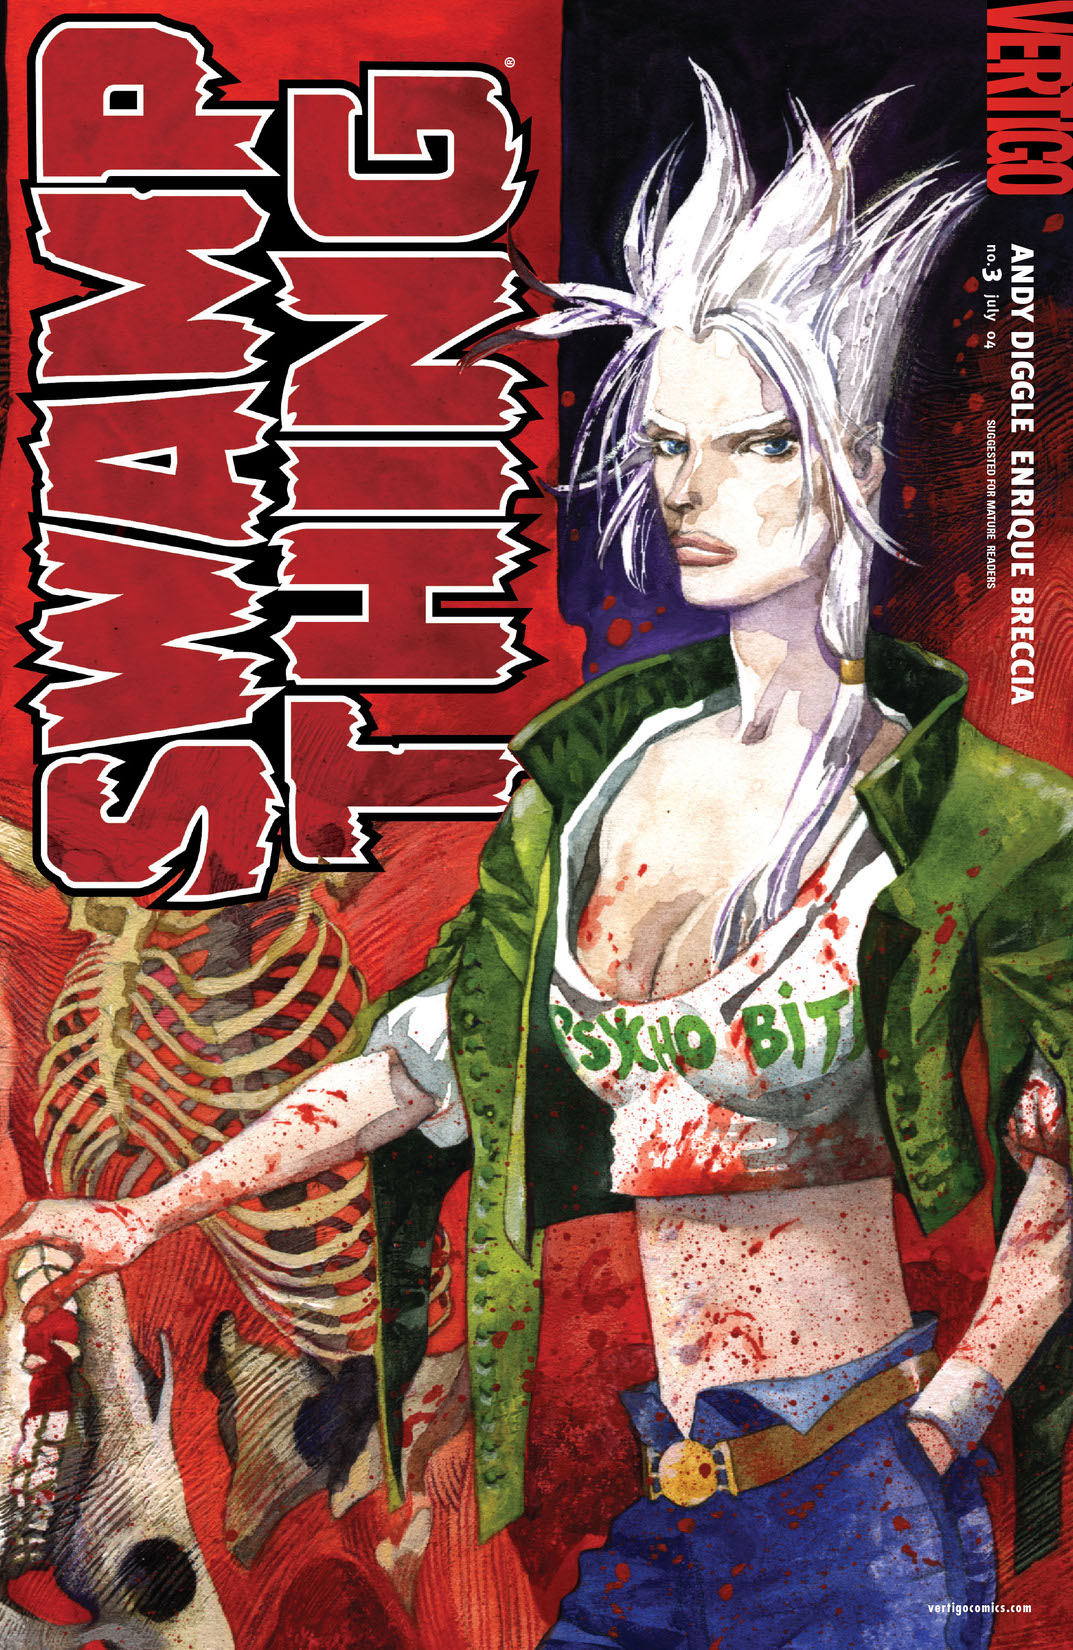 Swamp Thing (2004-) #3 preview images